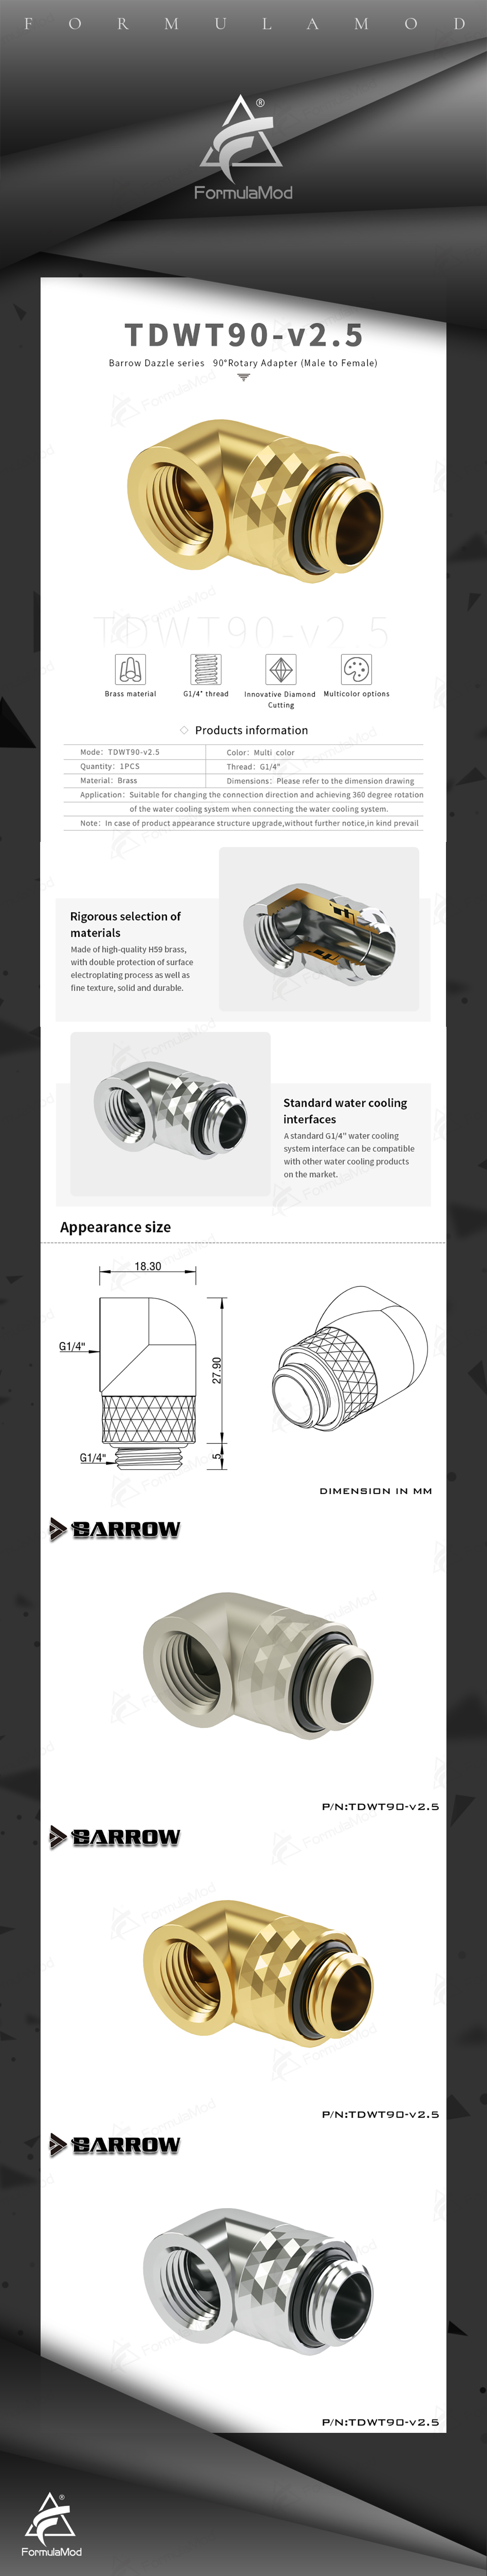 Barrow G1/4''Thread 90 Degree Male To Female Water Cooling Adaptors, Water Cooling Fitting, TDWT90-v2.5  